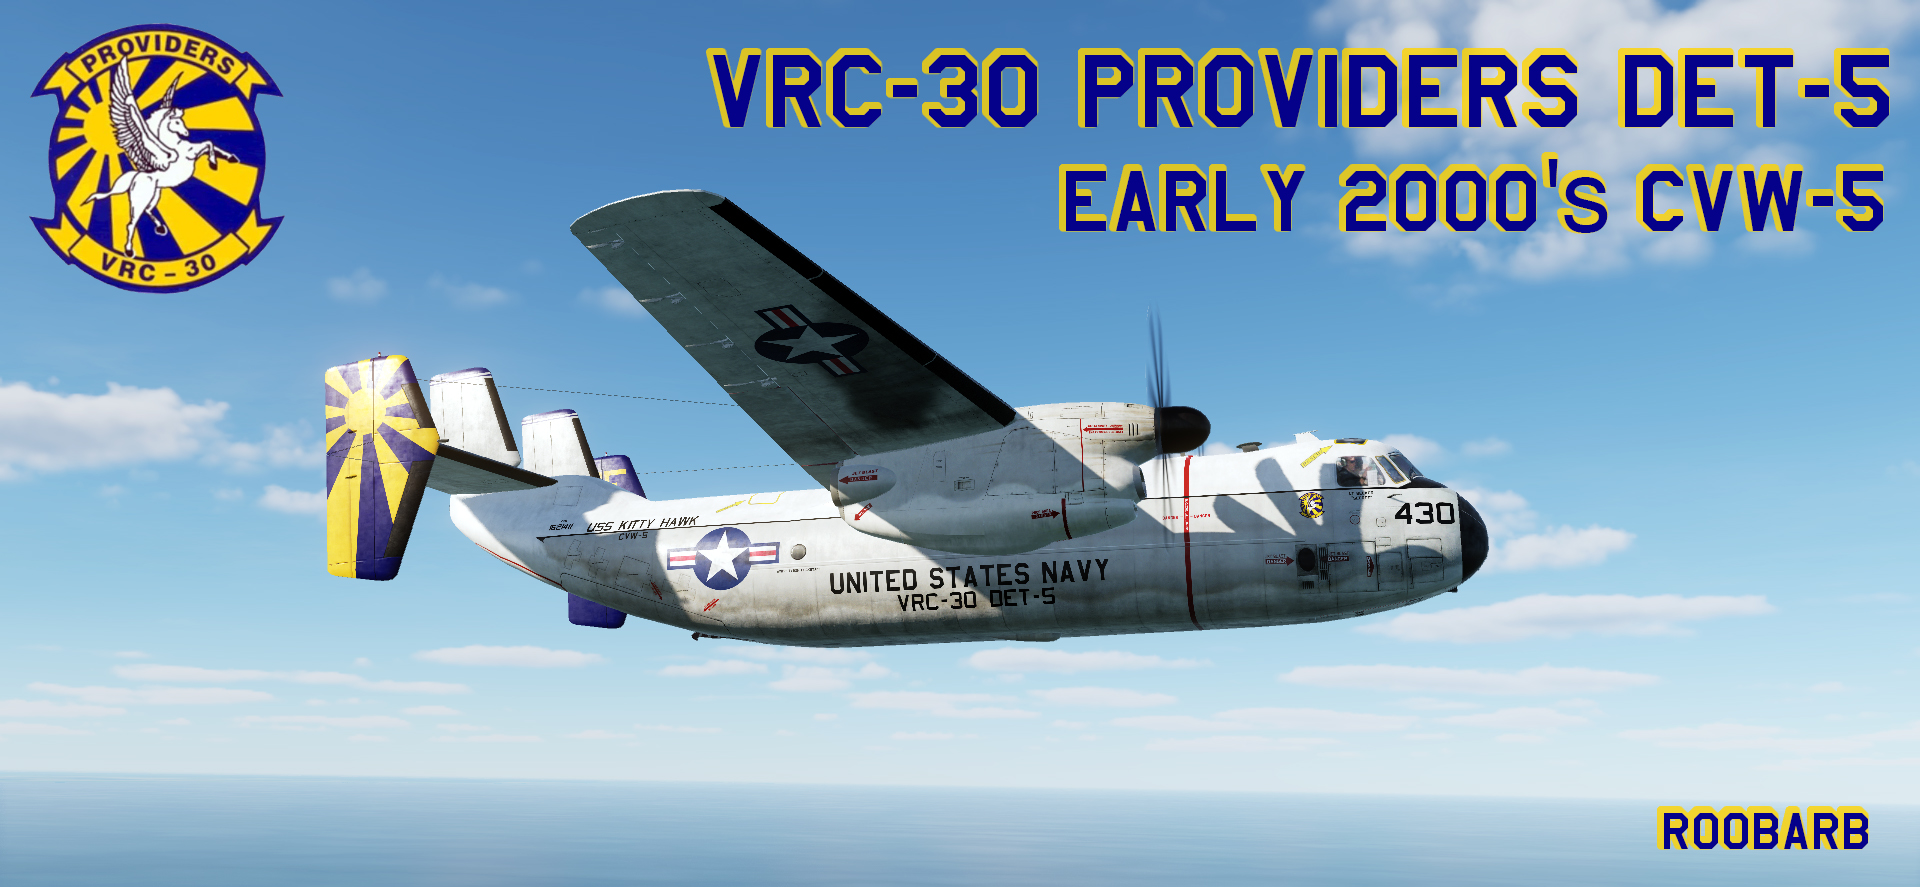 VRC-30 Det 5 C-2A Early 2000s